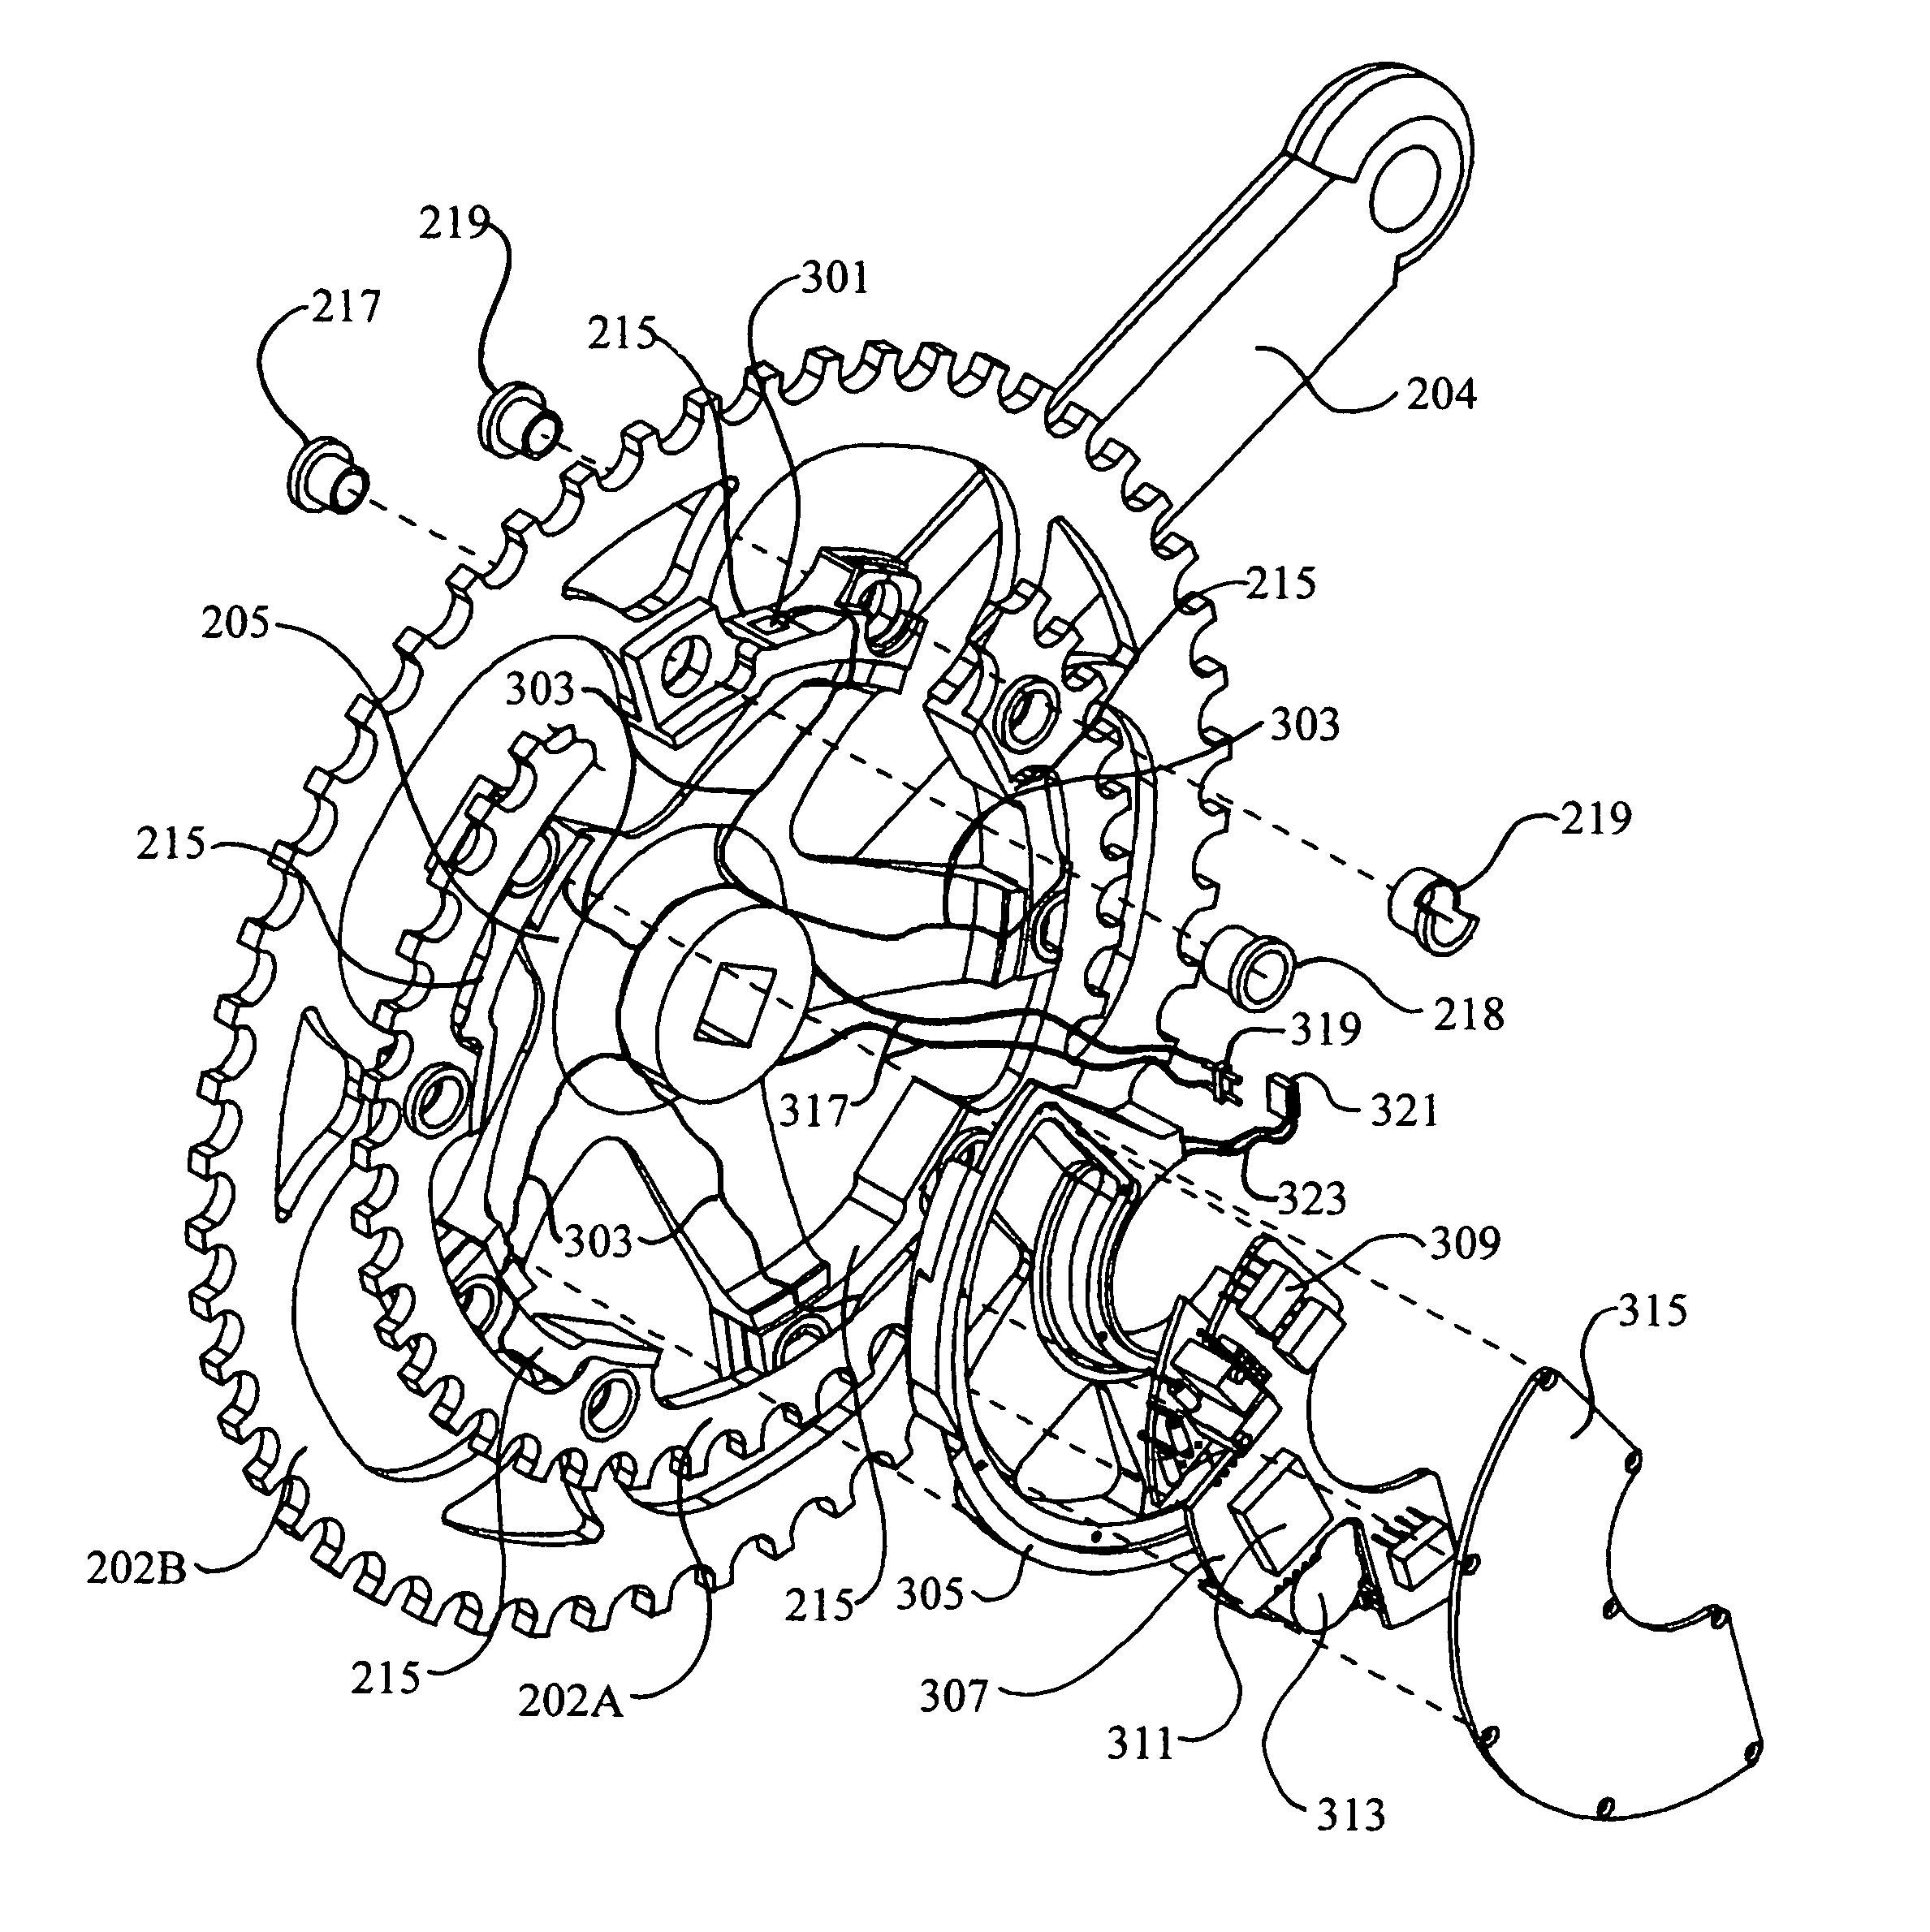 Load measurement apparatus and methods utilizing torque sensitive link for pedal powered devices